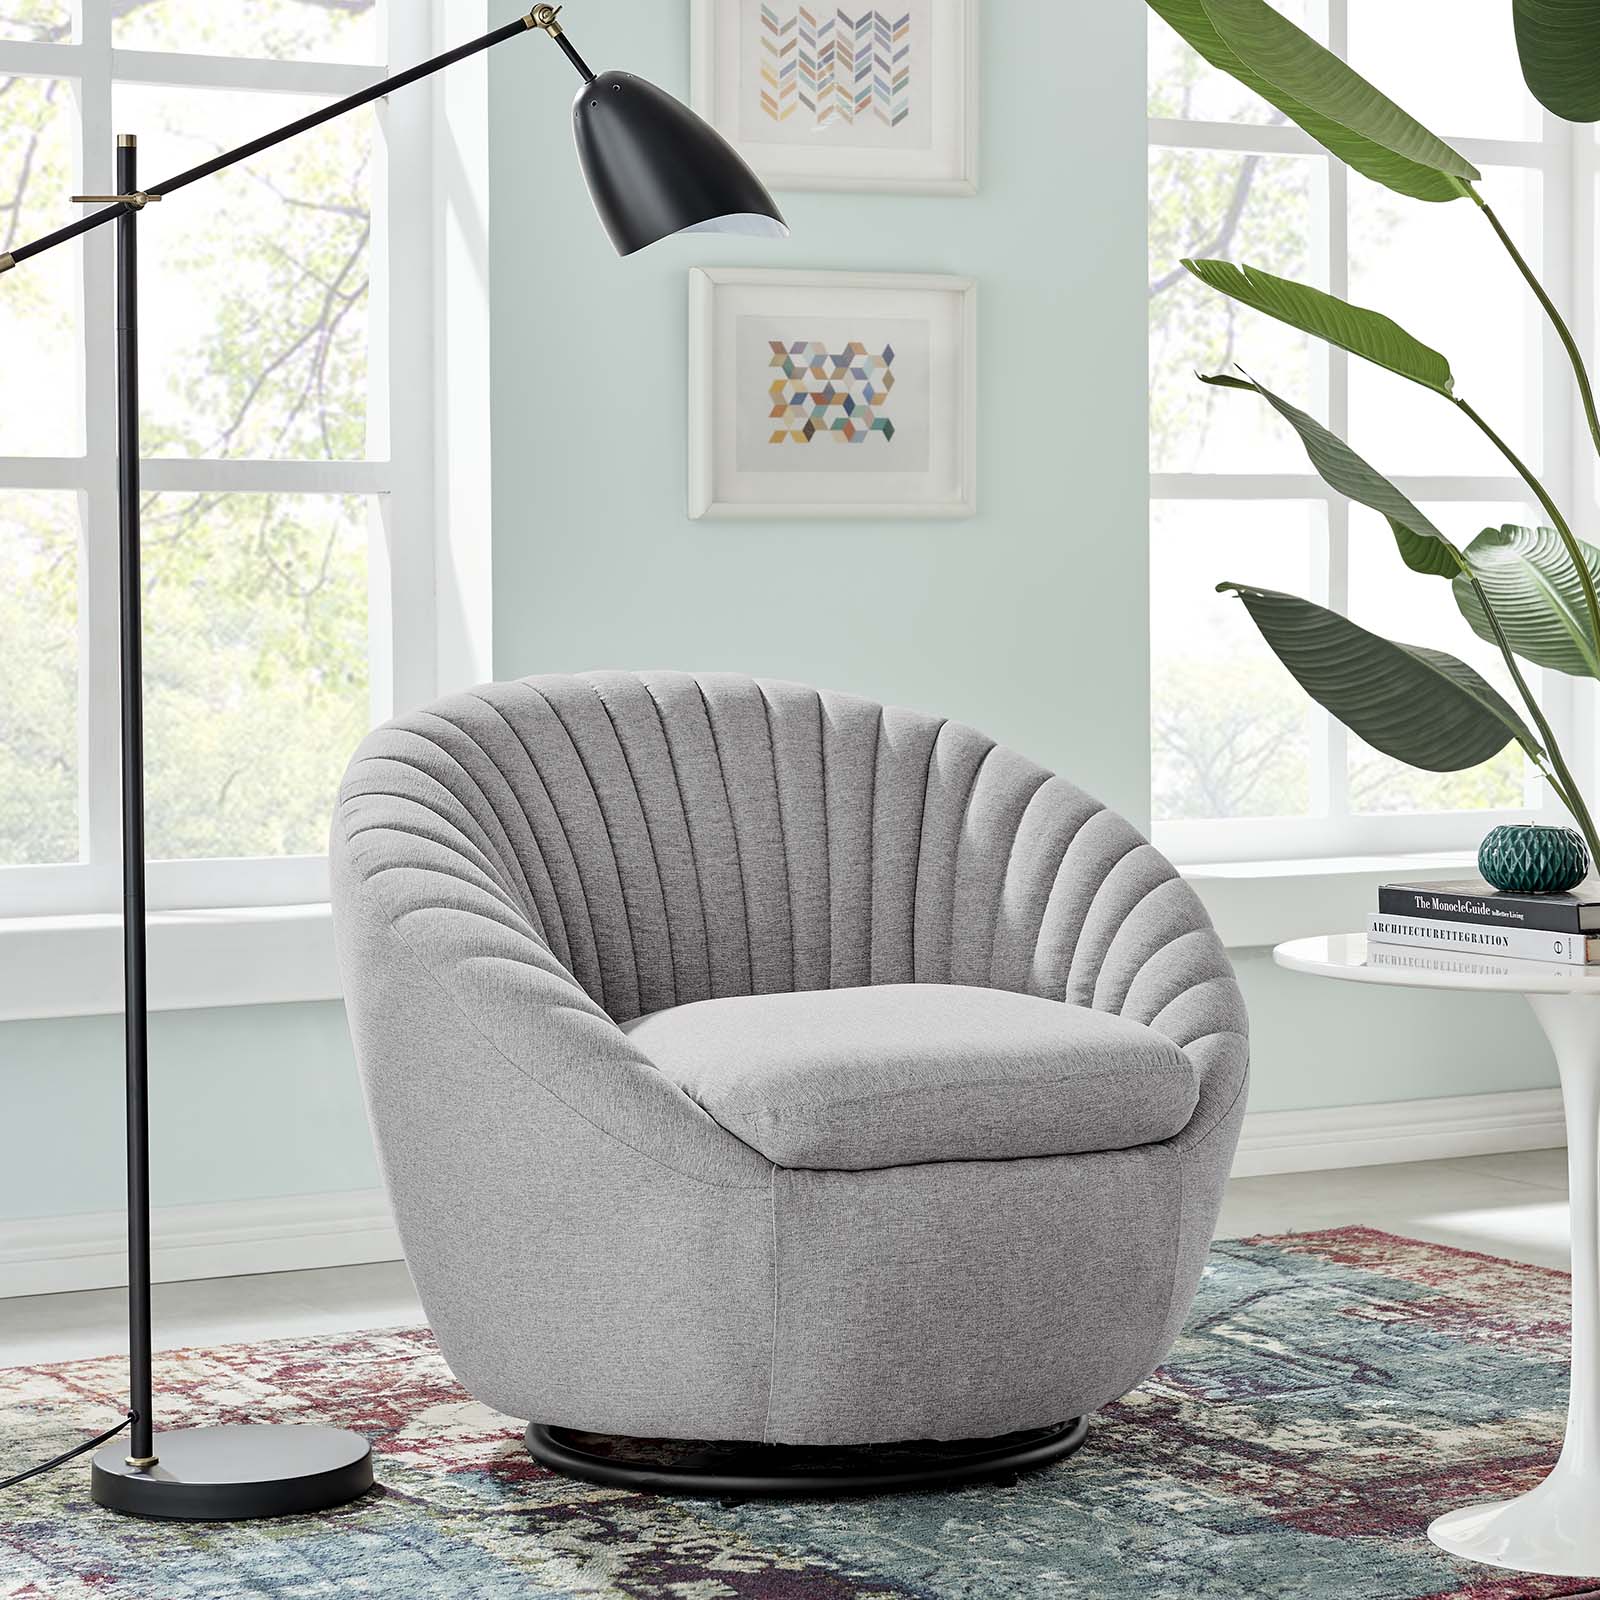 Modway Accent Chairs - Whirr Tufted Fabric Fabric Swivel Chair Black Light Gray